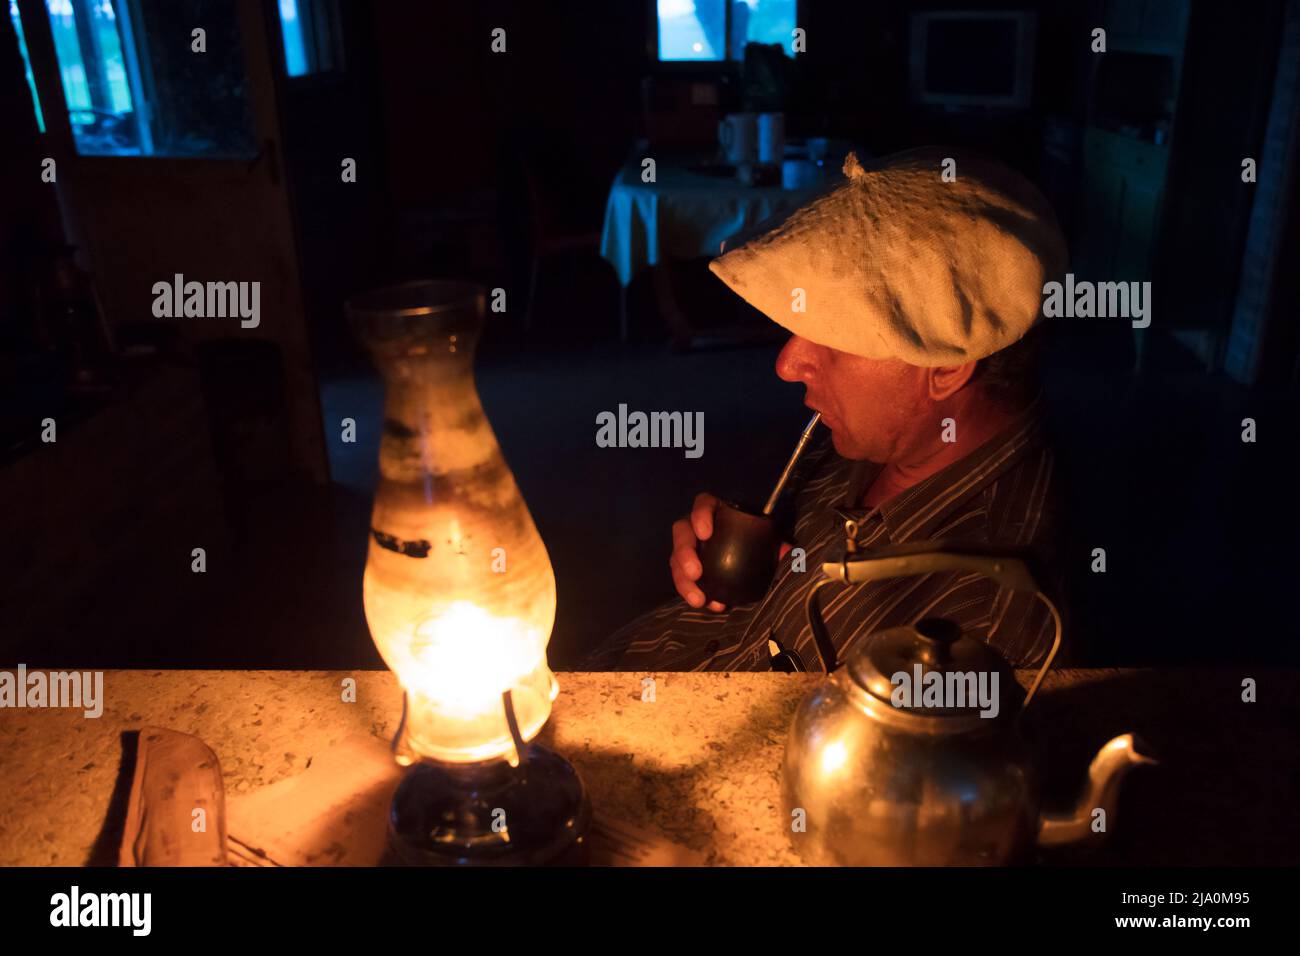 A gaucho drinking mate (National Argentine drink) by the light of a lantern at the Estancia Santa Catalina, Pardo, Buenos Aires province, Argentina. Stock Photo